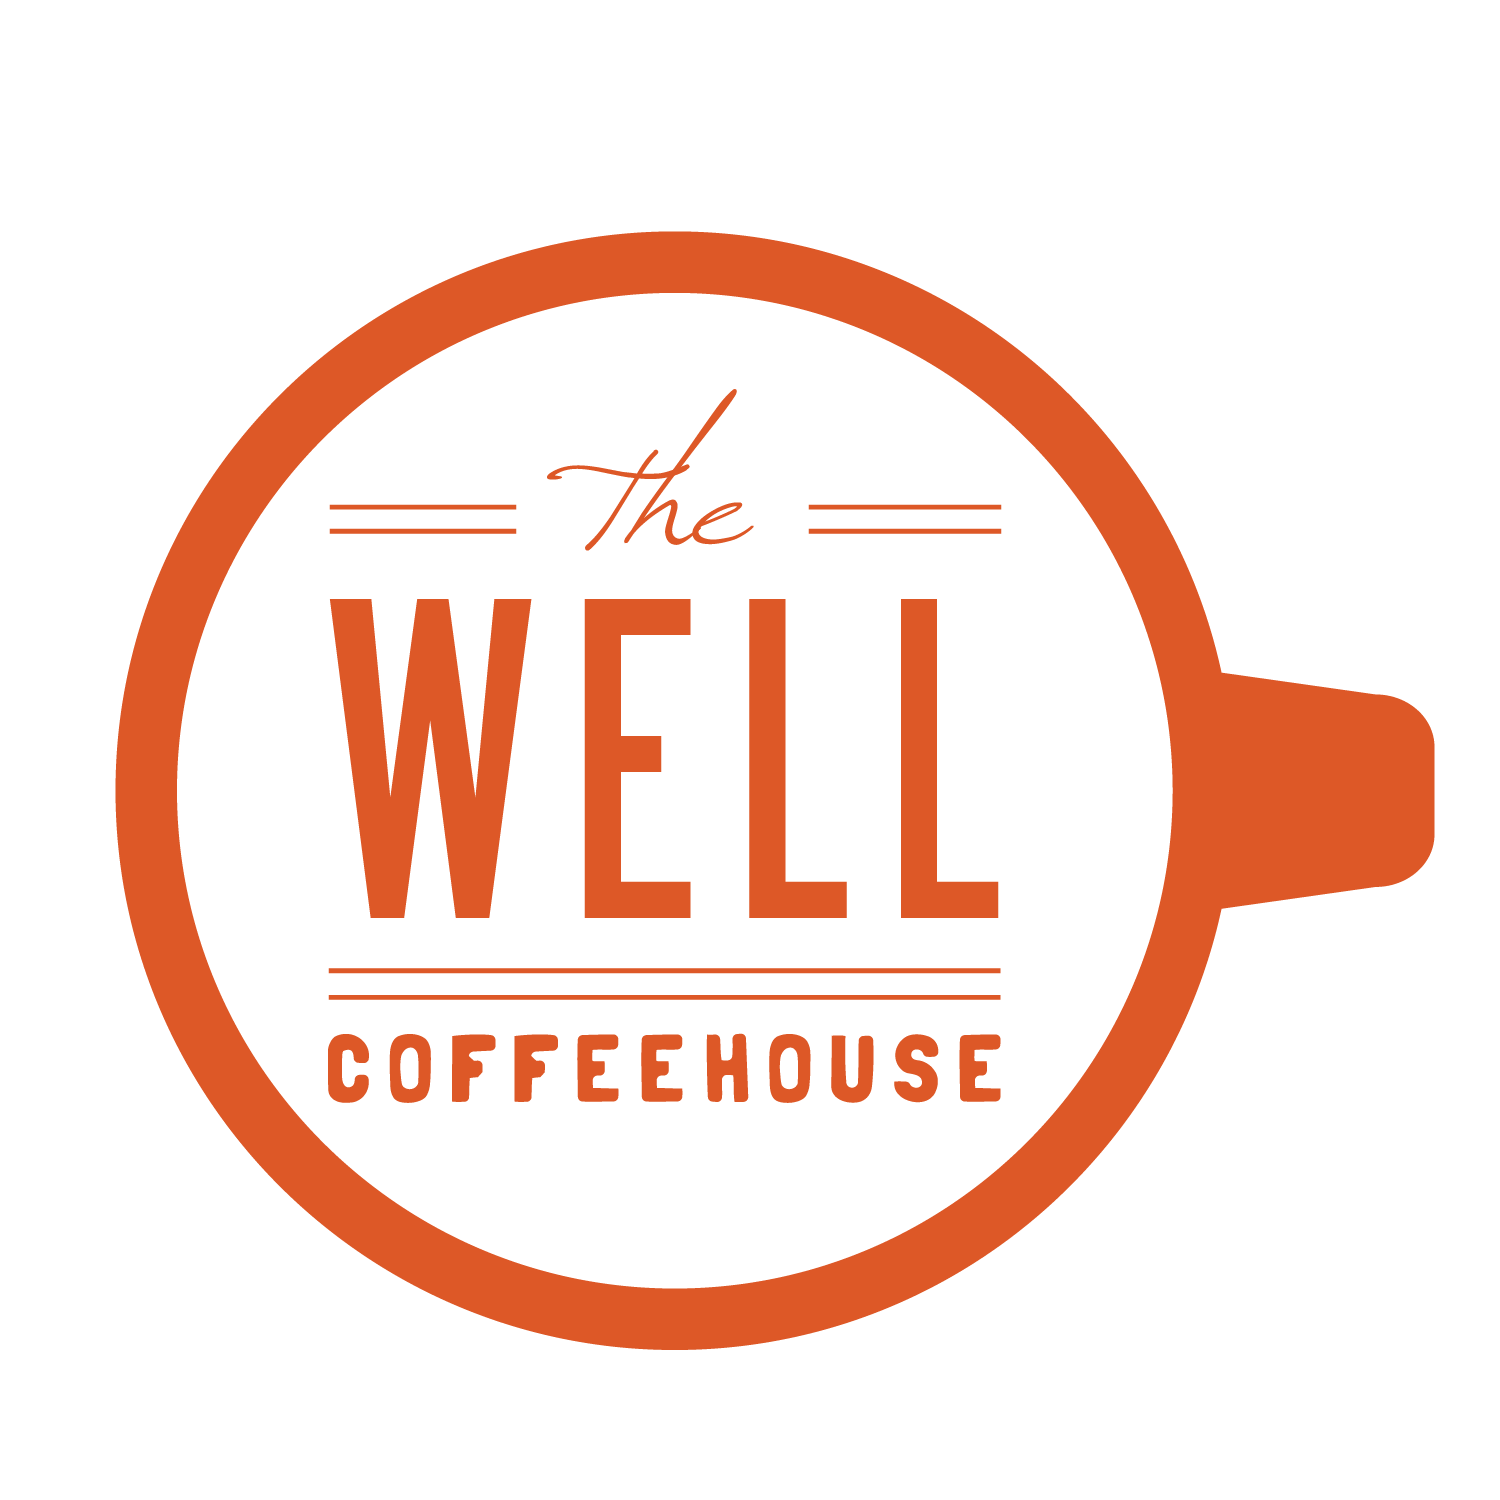 The Well Coffeehouse | Turning Coffee Into Water